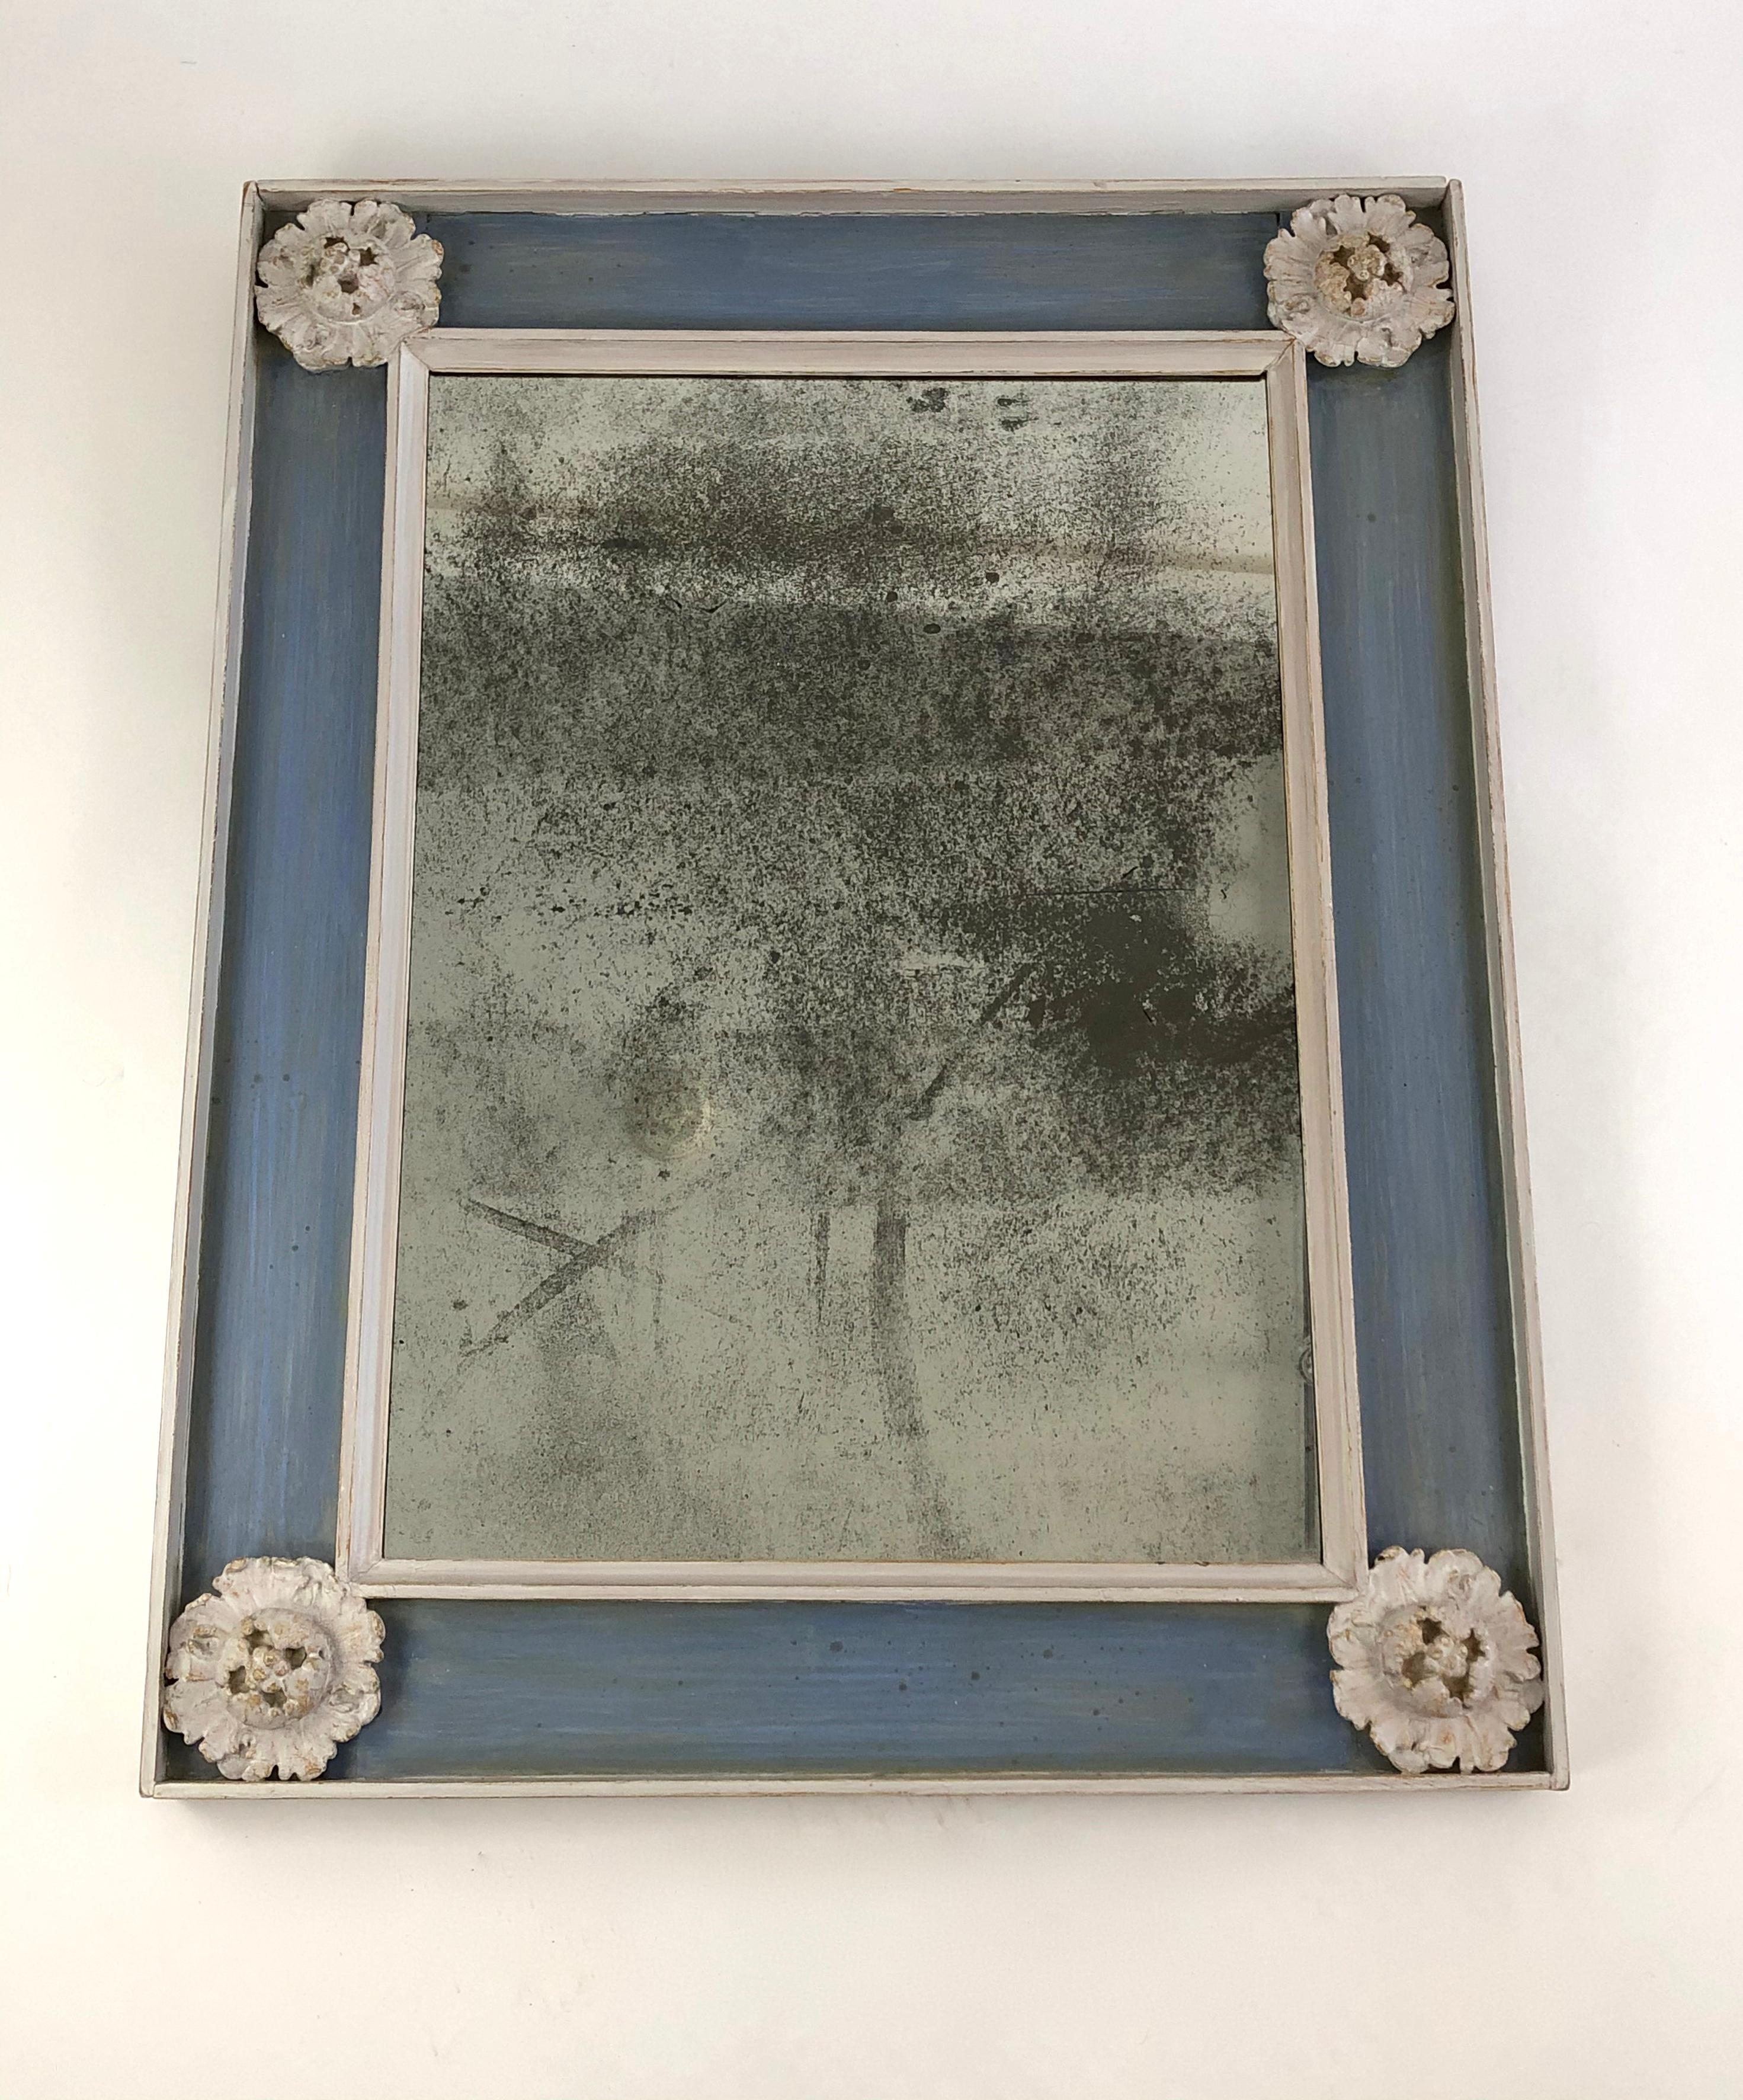 A rectangular neoclassical style slate blue and white painted frame, with deeply carved applied rosettes in the four corners and fitted with an antiqued mirror glass plate.